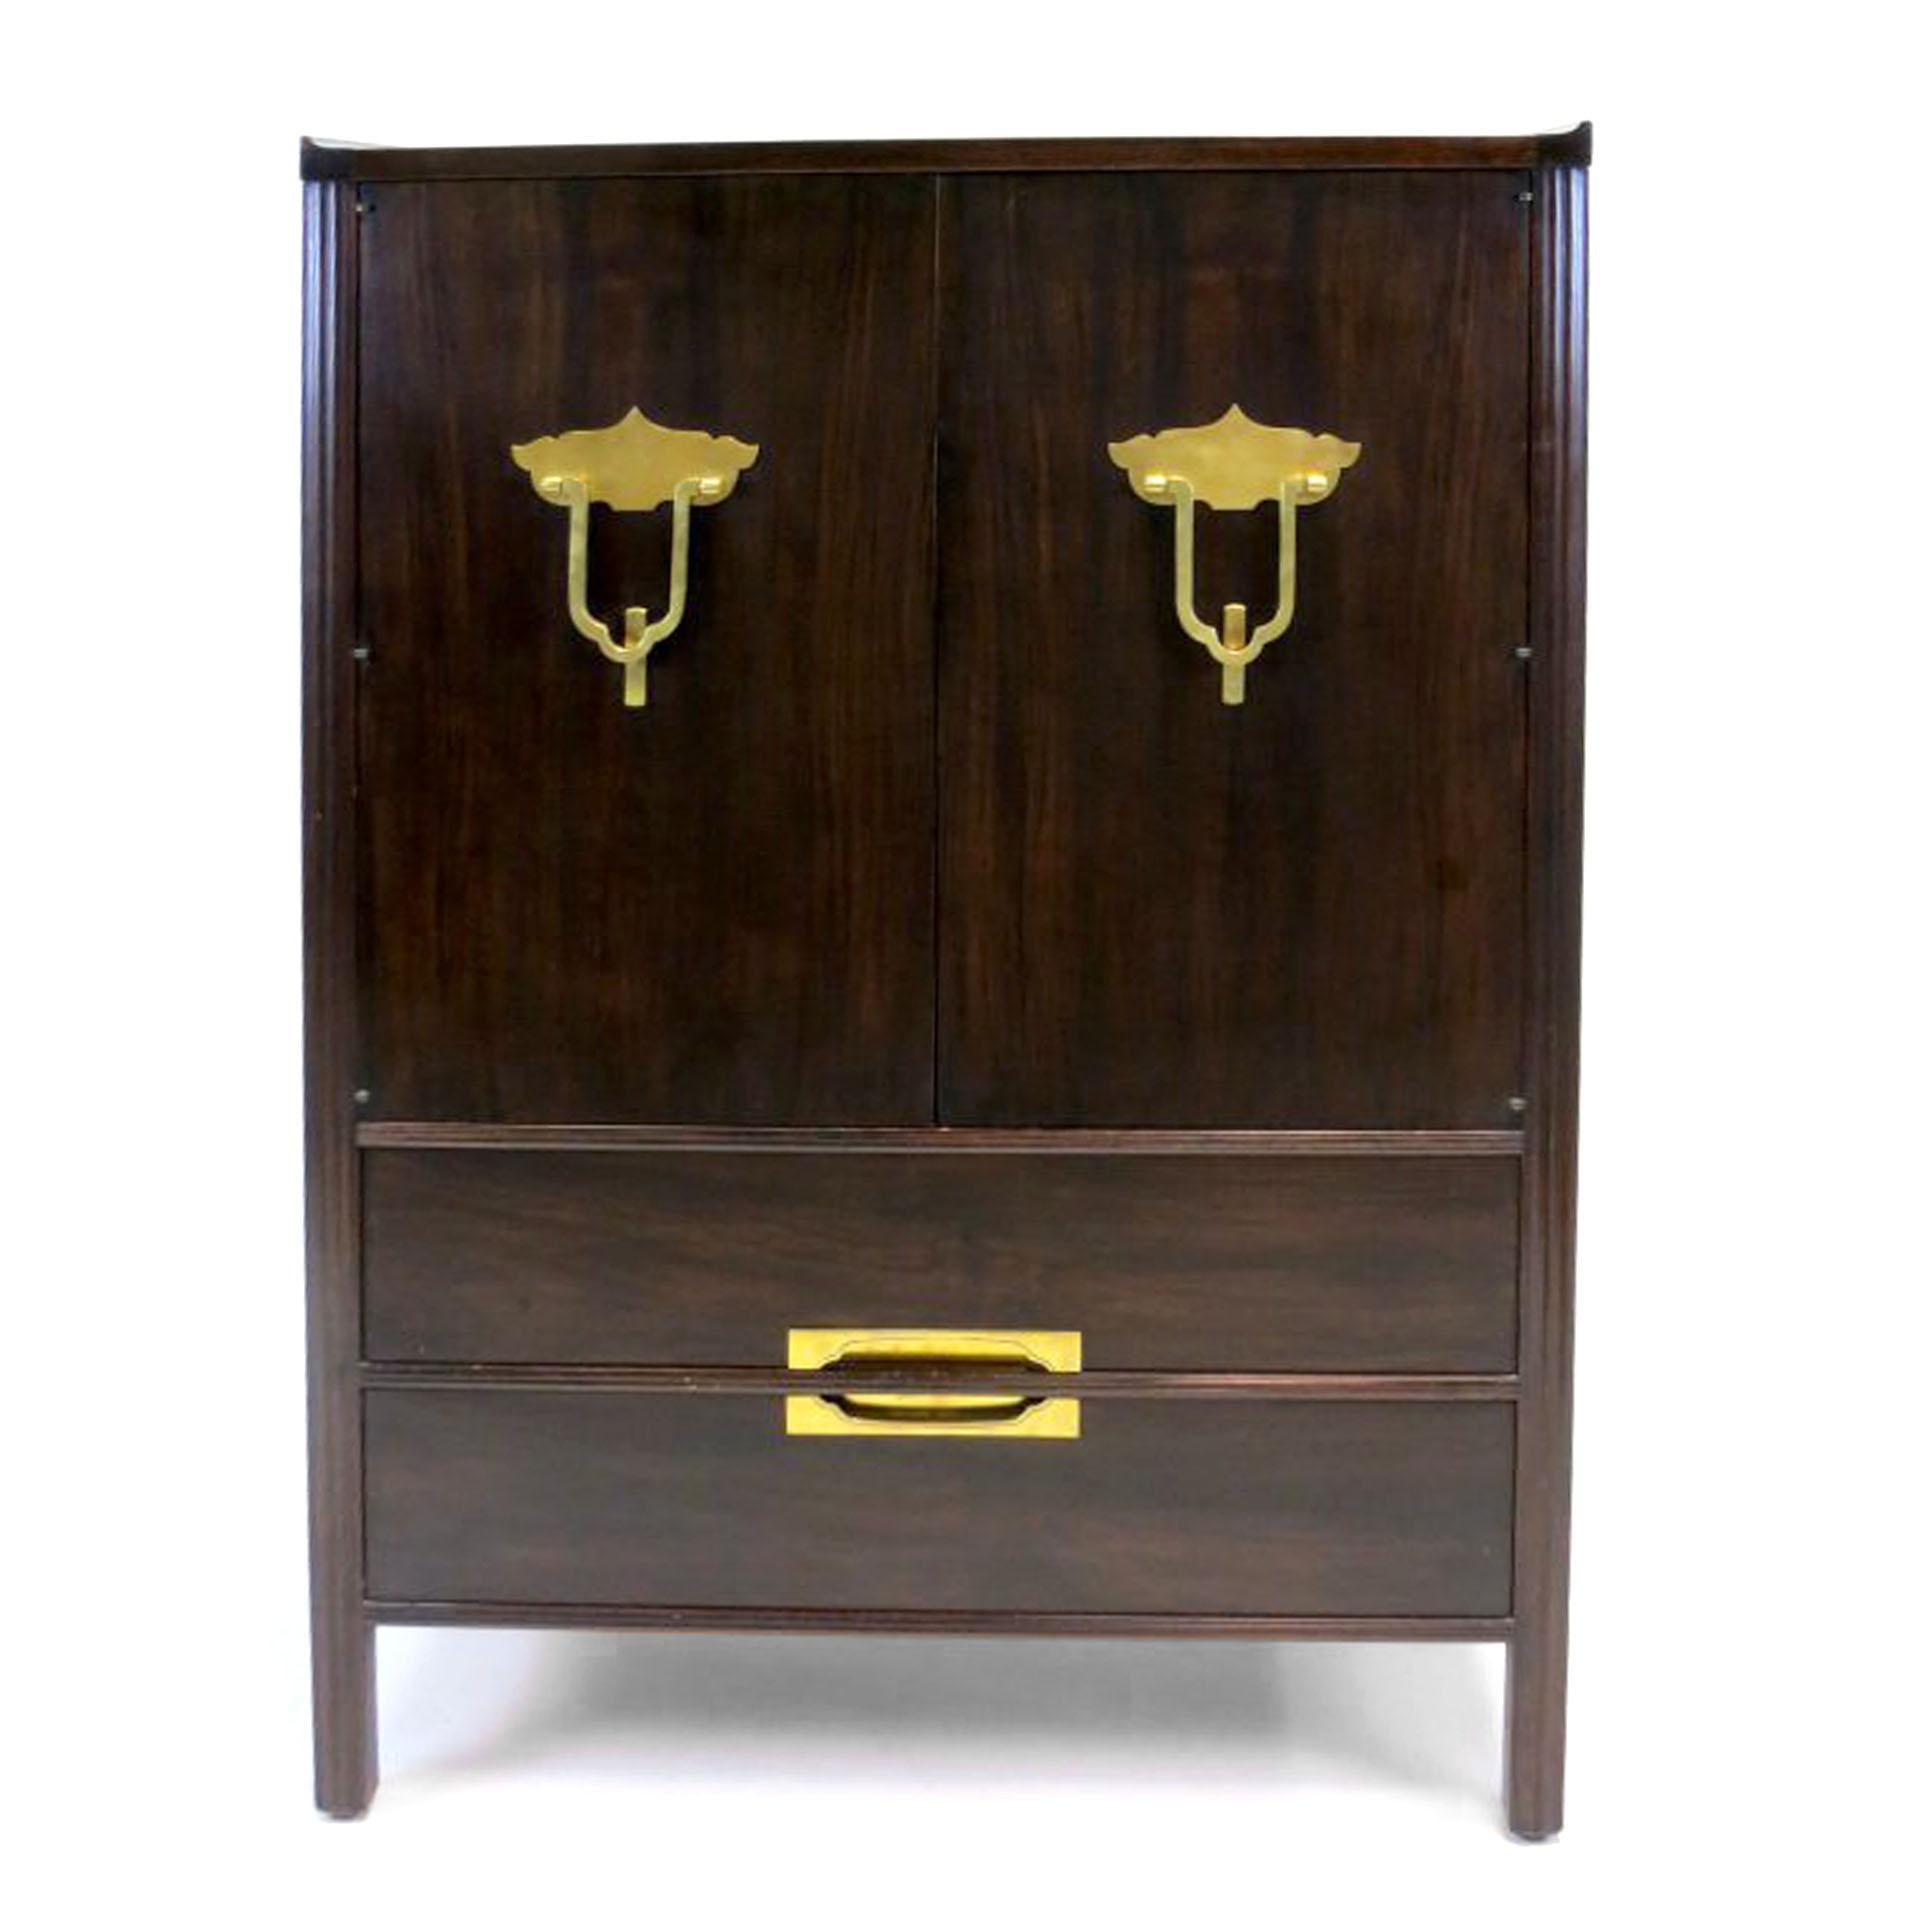 Tall cabinet or small armoire with two doors above two drawers by Widdicomb in an ebonized mahogany finish. Fantastic Asian insprired brass handles and inset pulls on the drawers, with reeded detailing and upswept top edge. Interior has one drawer